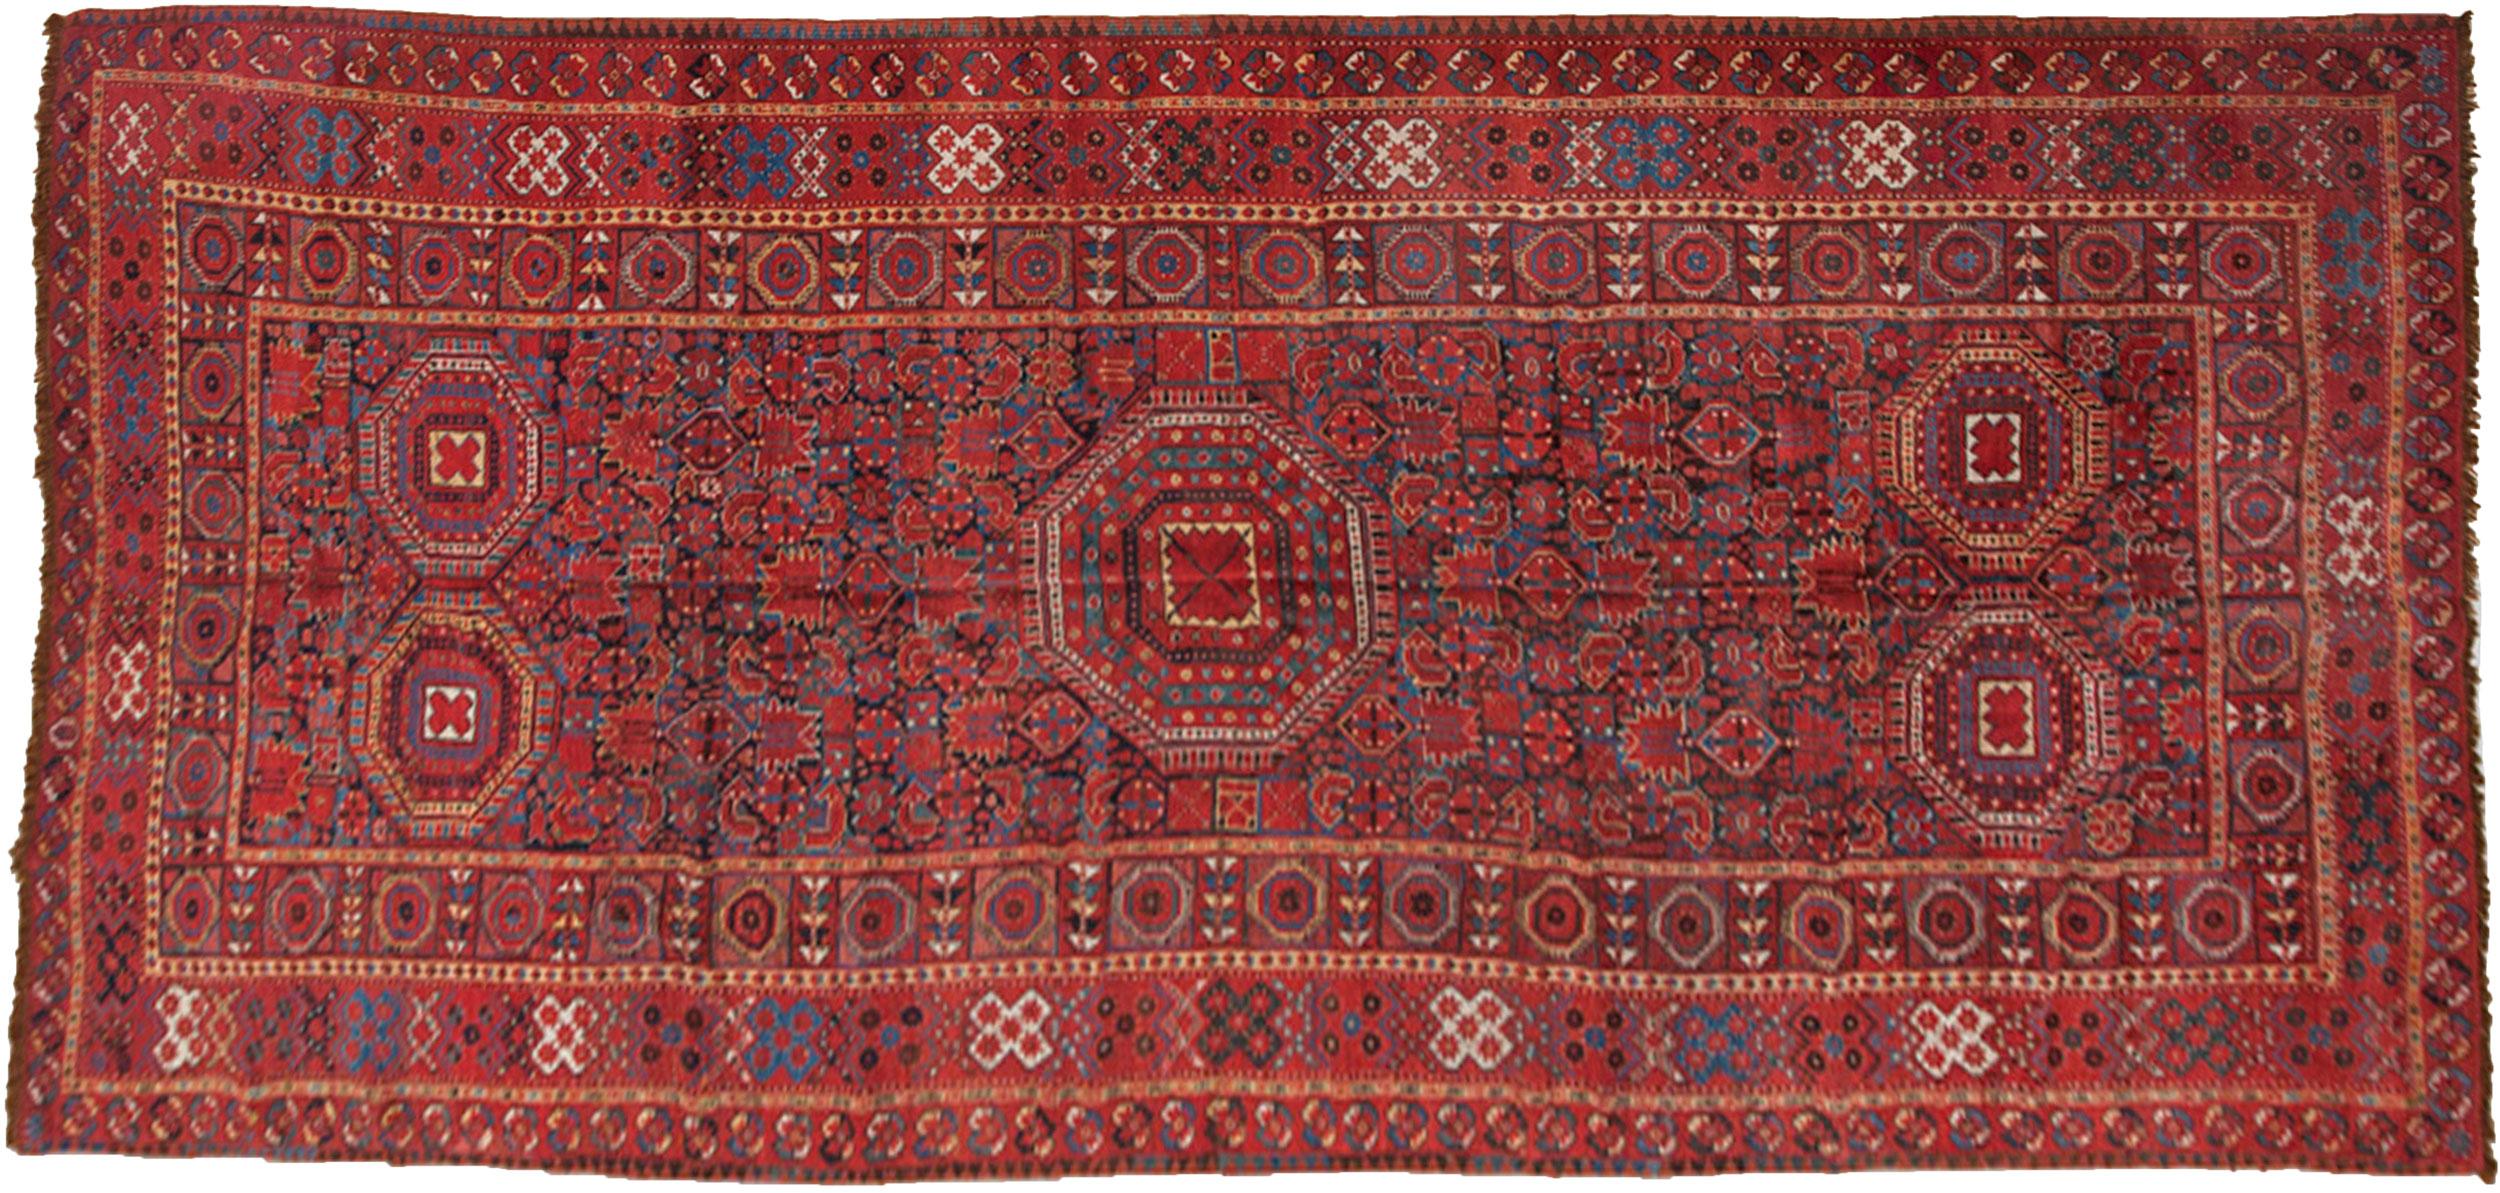 Impressive antique Beshir carpet. This carpet takes many motifs known from generations prior within the repertoire of Turkmen weaving ornament but borrows heavily from the more Perisianate traditions of sedentary Central Asia. The result is a